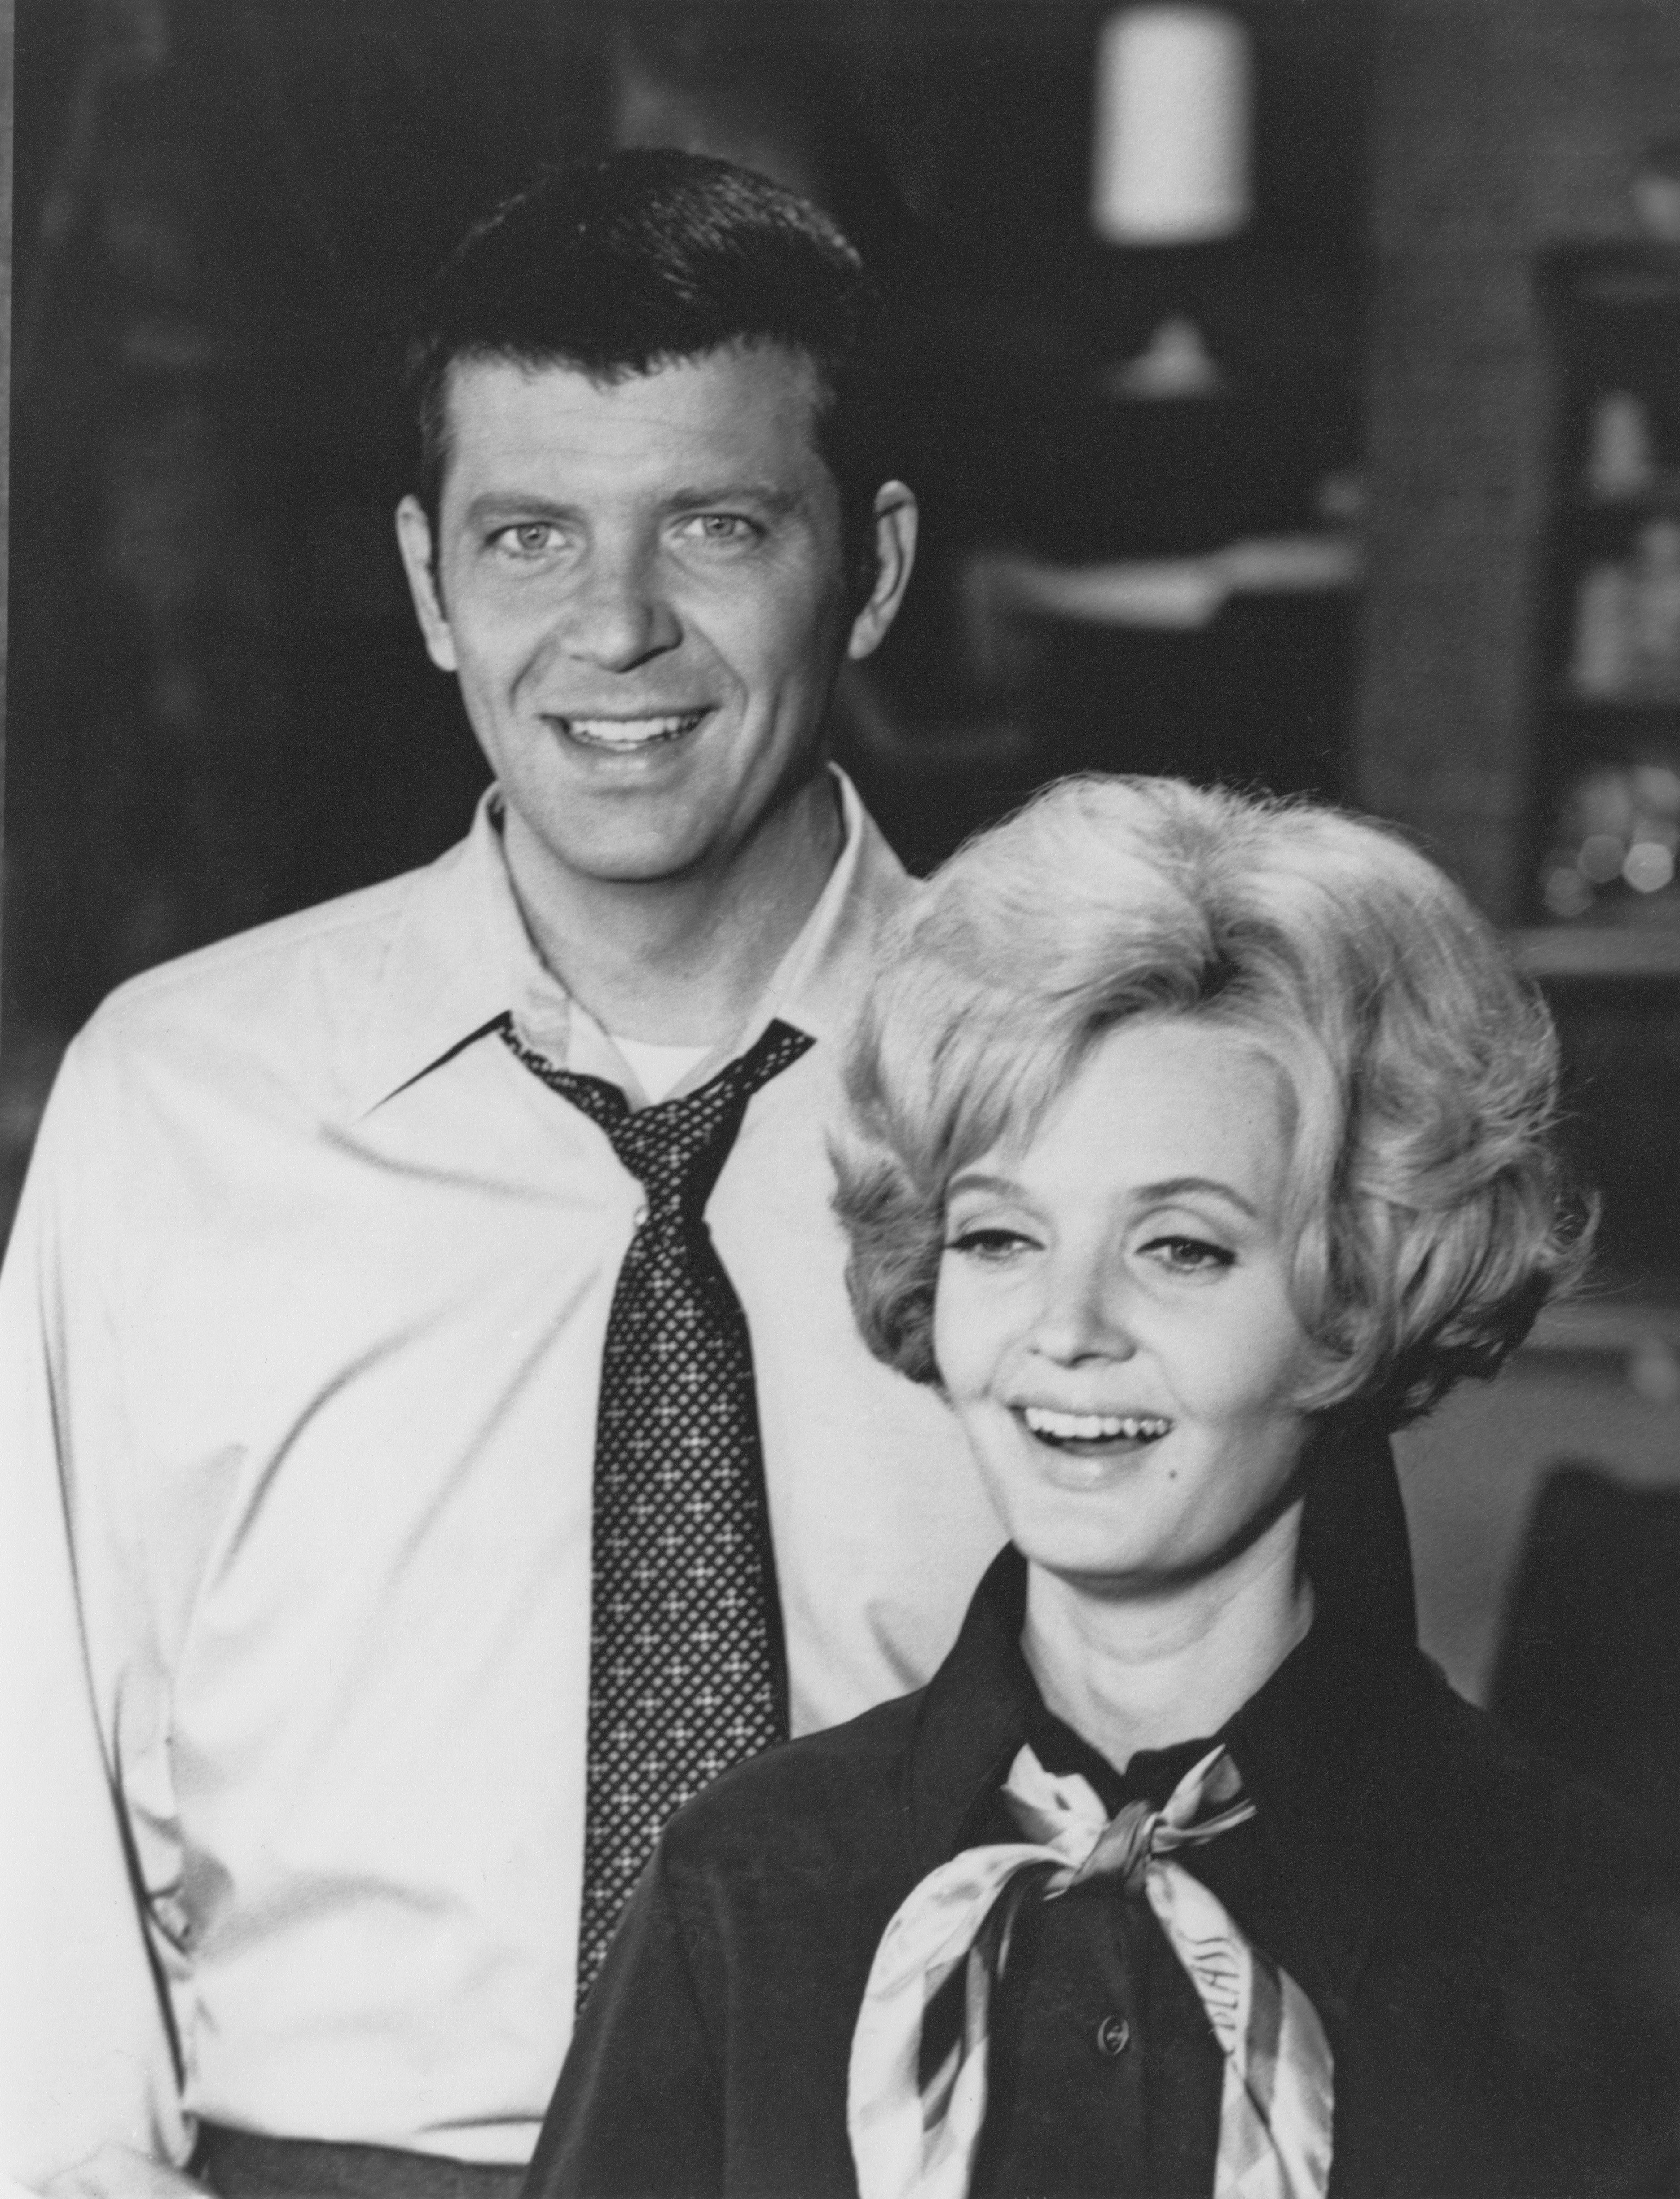 American actors Robert Reed, as Mike Brady, and Florence Henderson as Carol Brady, in the US TV sitcom 'The Brady Bunch', circa 1970 | Photo: Getty Images